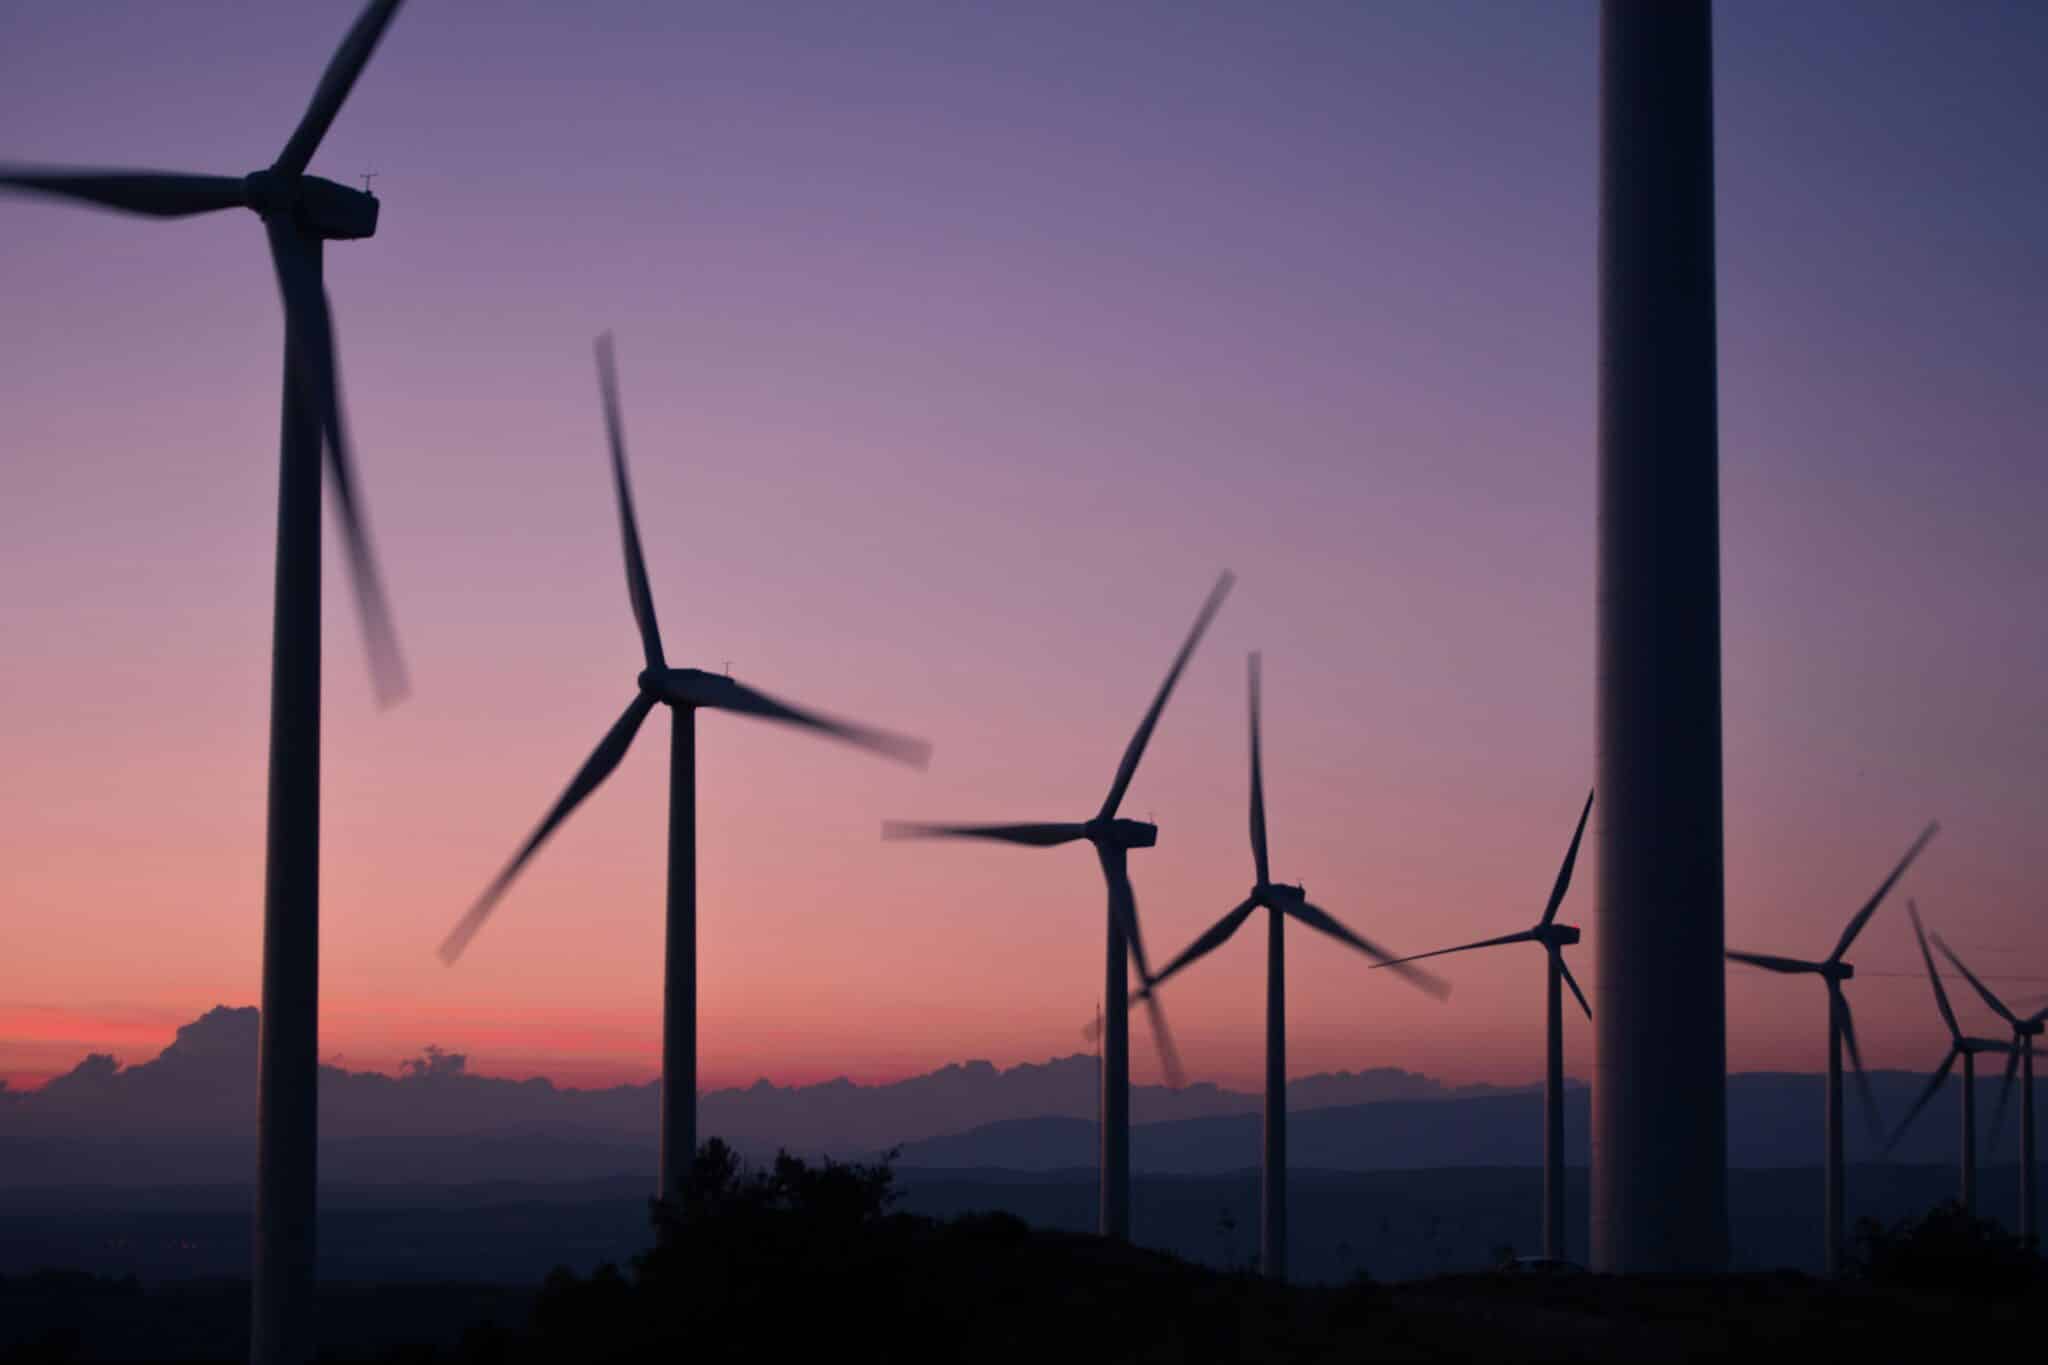 After a tough 2023, where is the good news for the offshore wind industry in 2024?